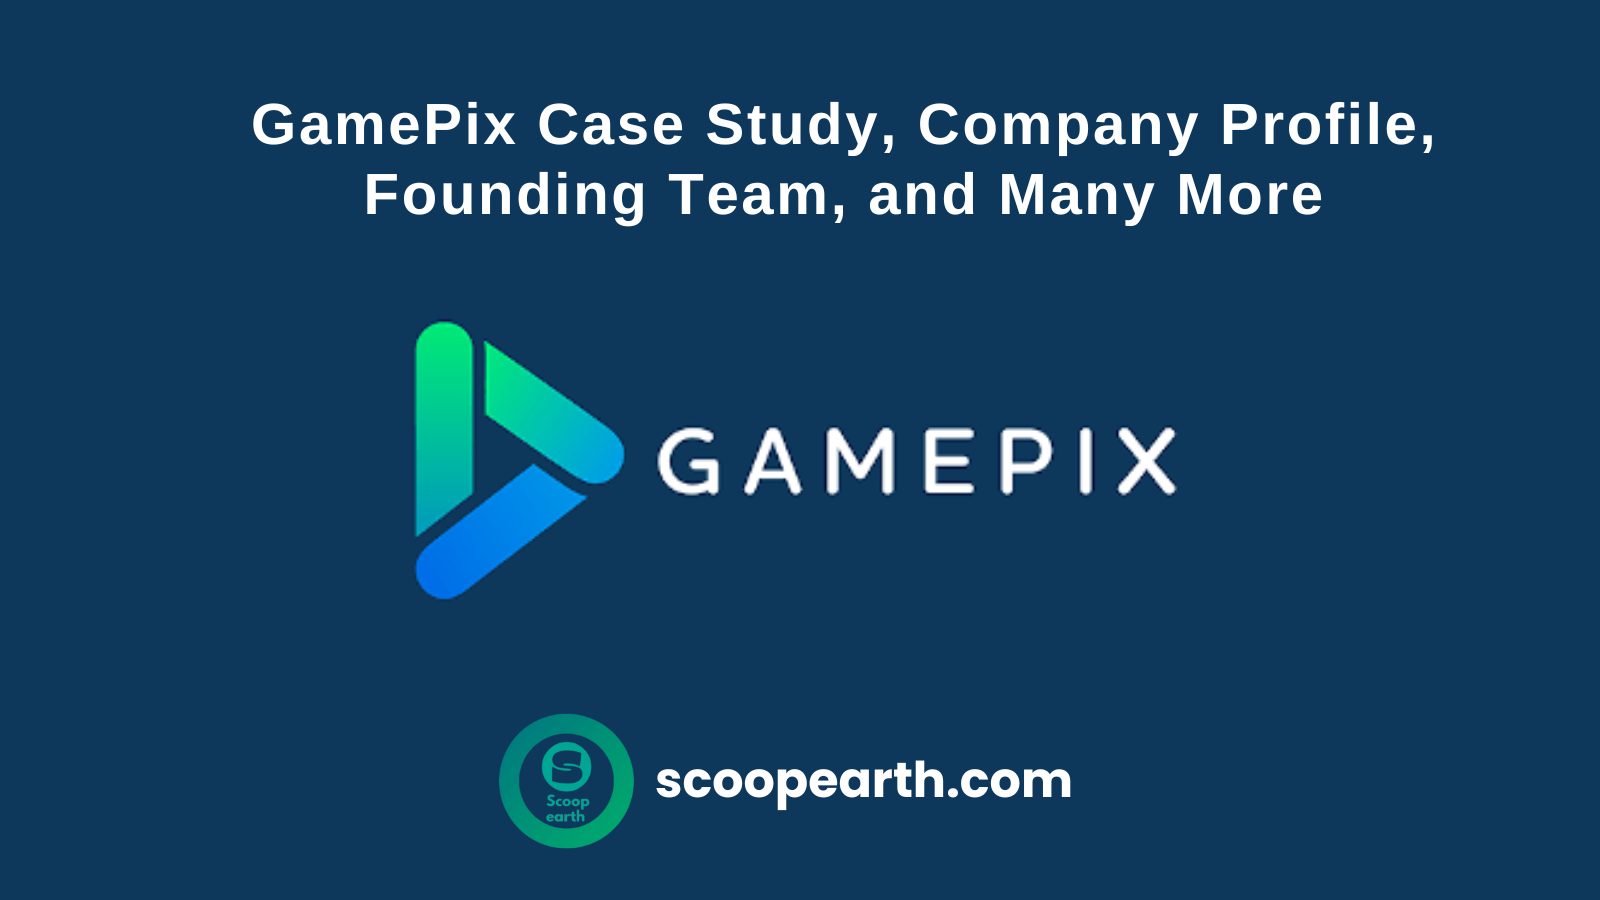 GamePix Case Study, Company Profile, Founding Team, and Many More